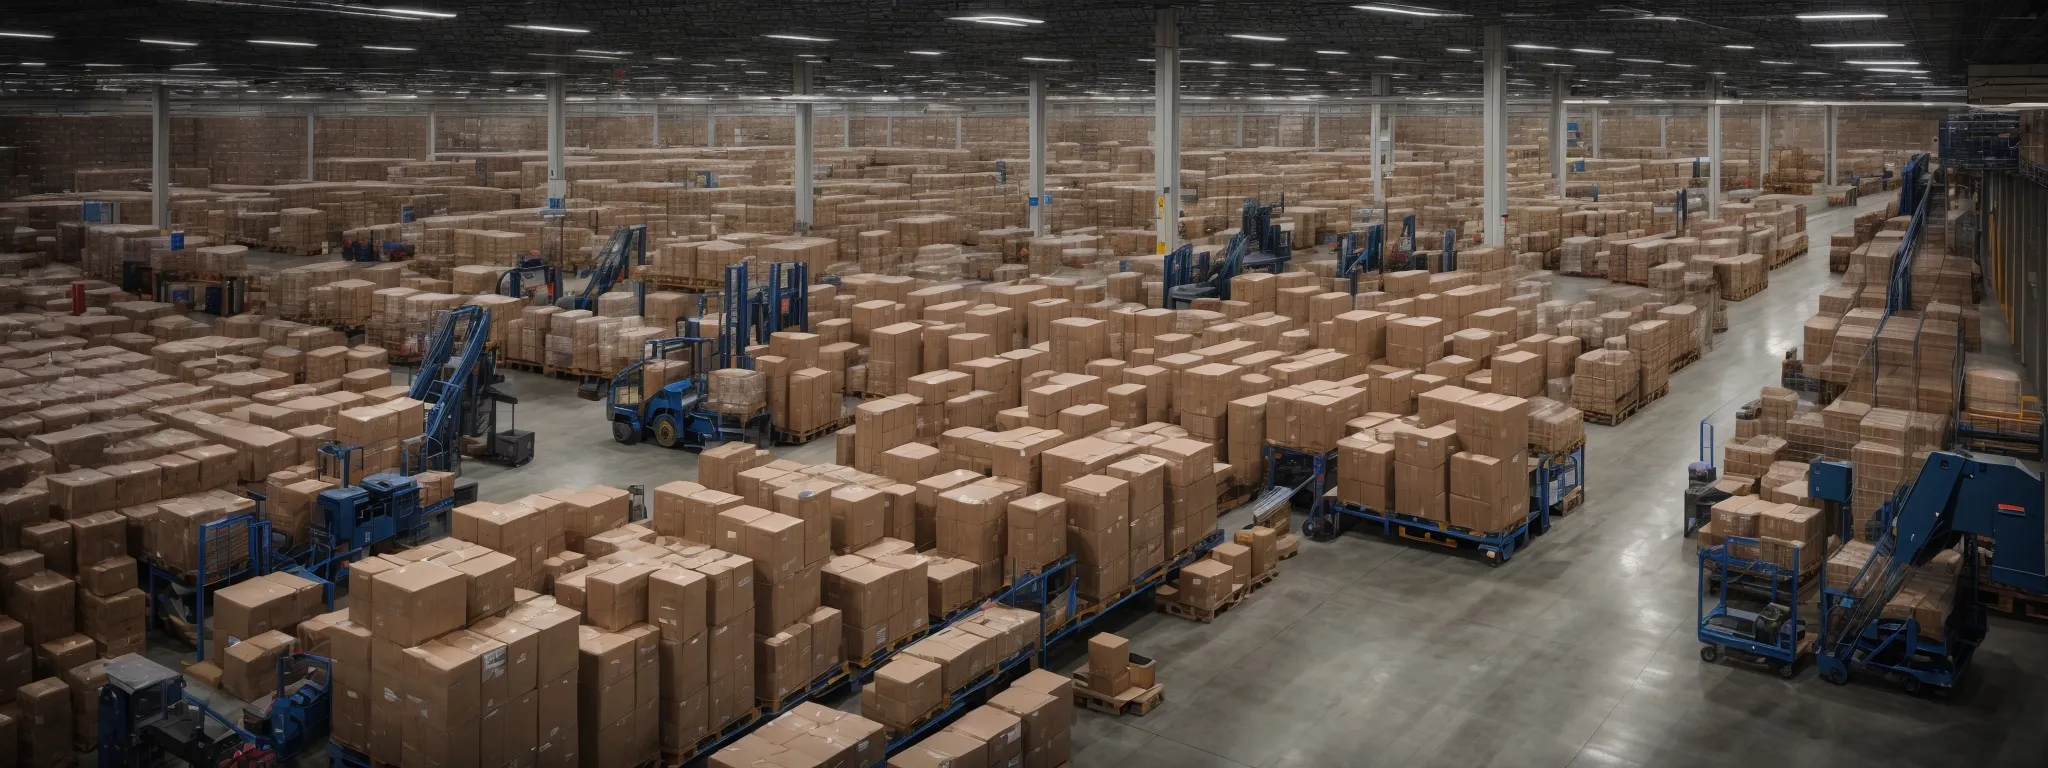 a bustling warehouse with workers processing orders amidst a maze of packages and conveyor belts, illustrating the heart of e-commerce logistics.